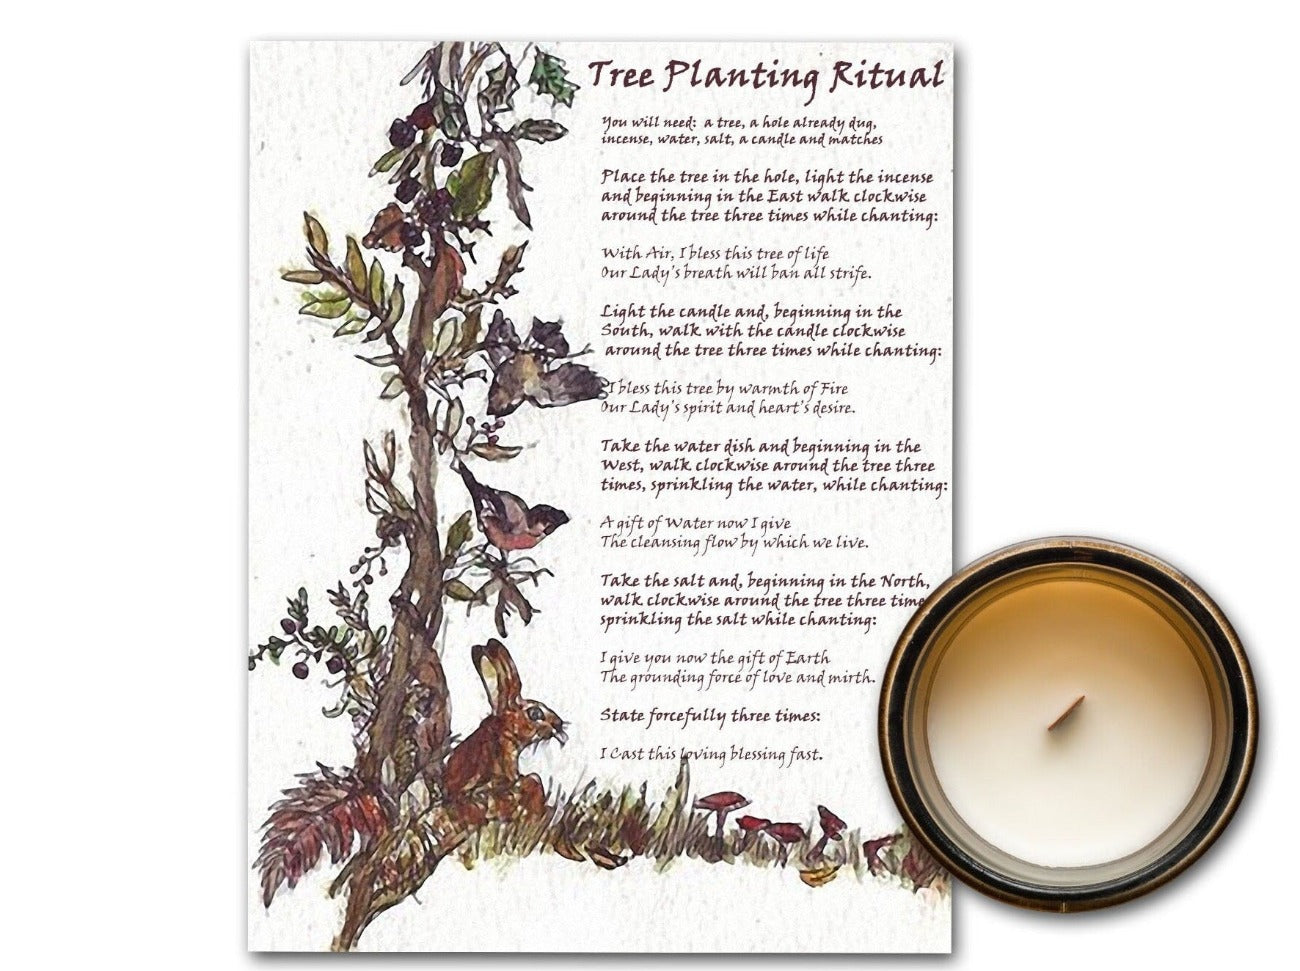 TREE PLANTING RITUAL, Green Witch, Plant Blessing Spell, Earth Day, Planting Magick Ritual, Wicca Tree Ritual, Herbal Witchcraft, Printable - Morgana Magick Spell